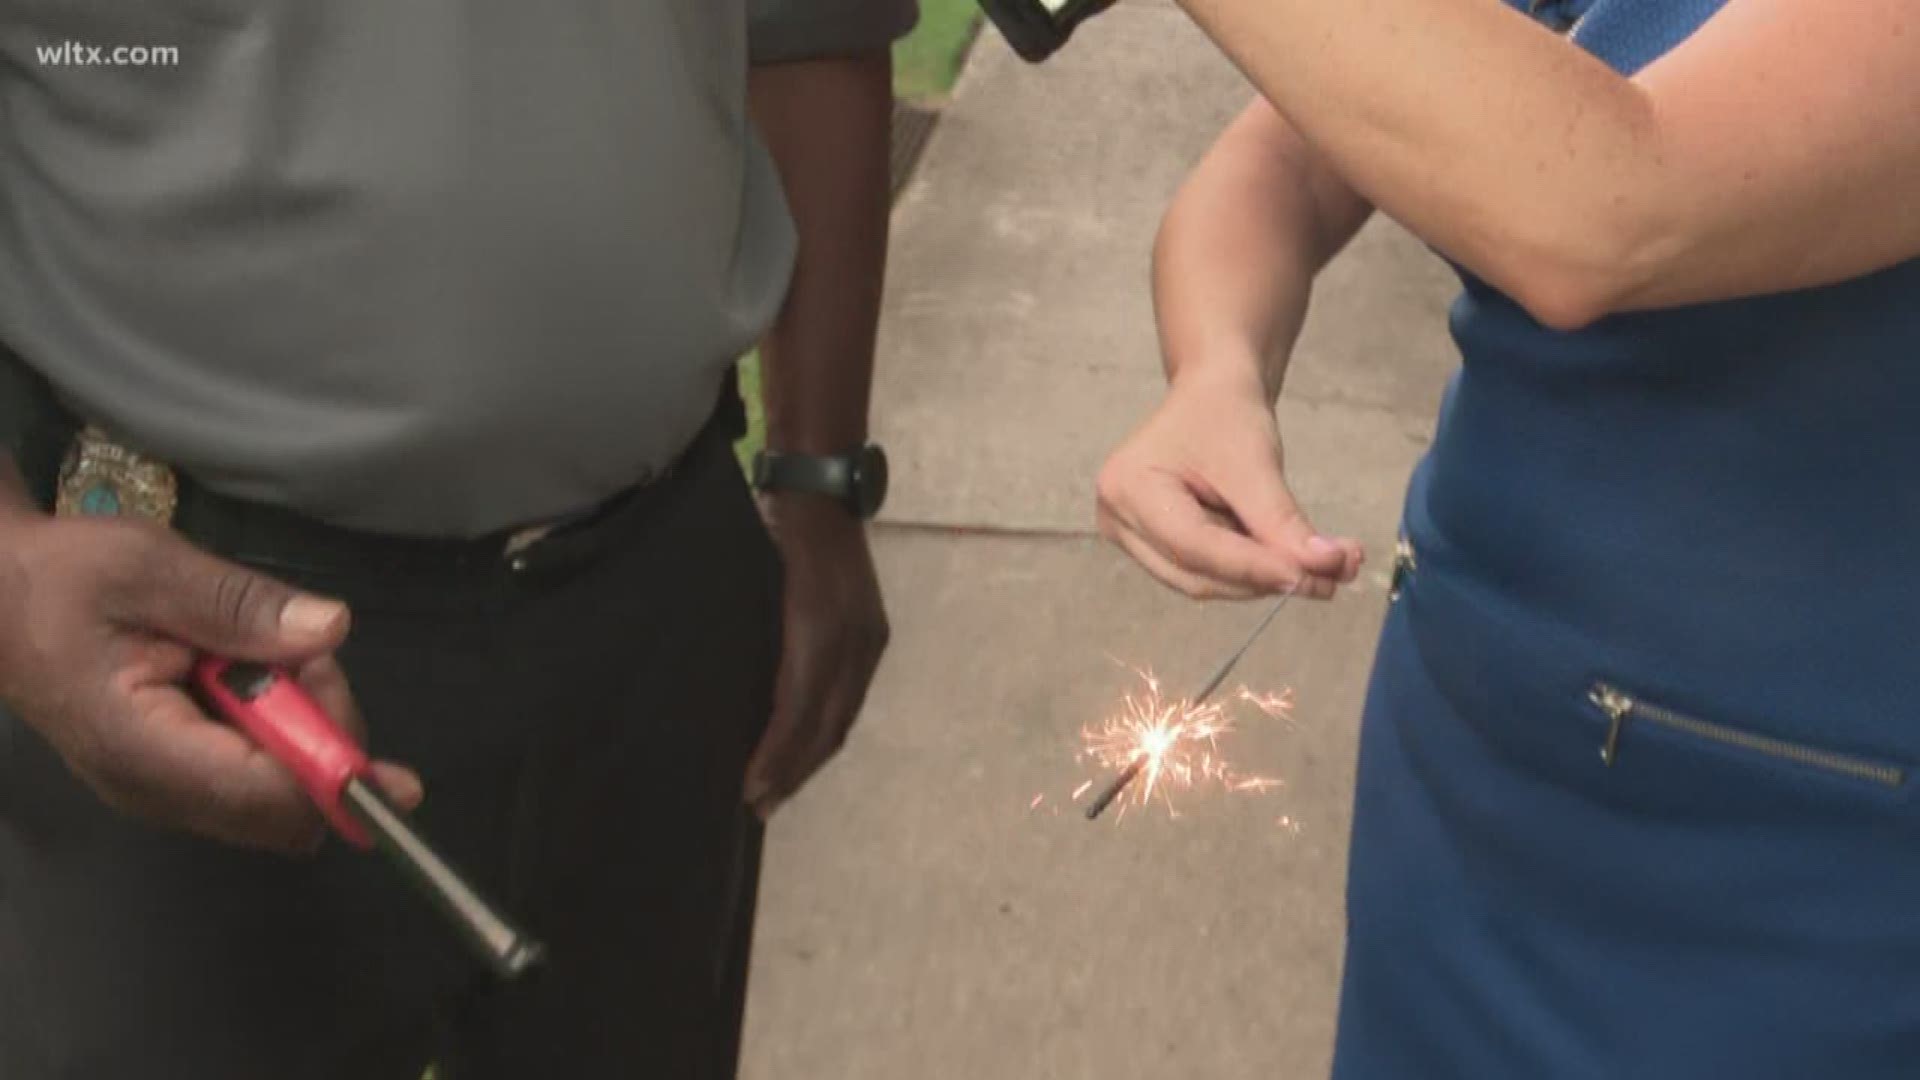 Columbia Fire Chief Aubrey Jenkins stopped by News19 to provide some safety tips for using fireworks over the July 4th holiday.